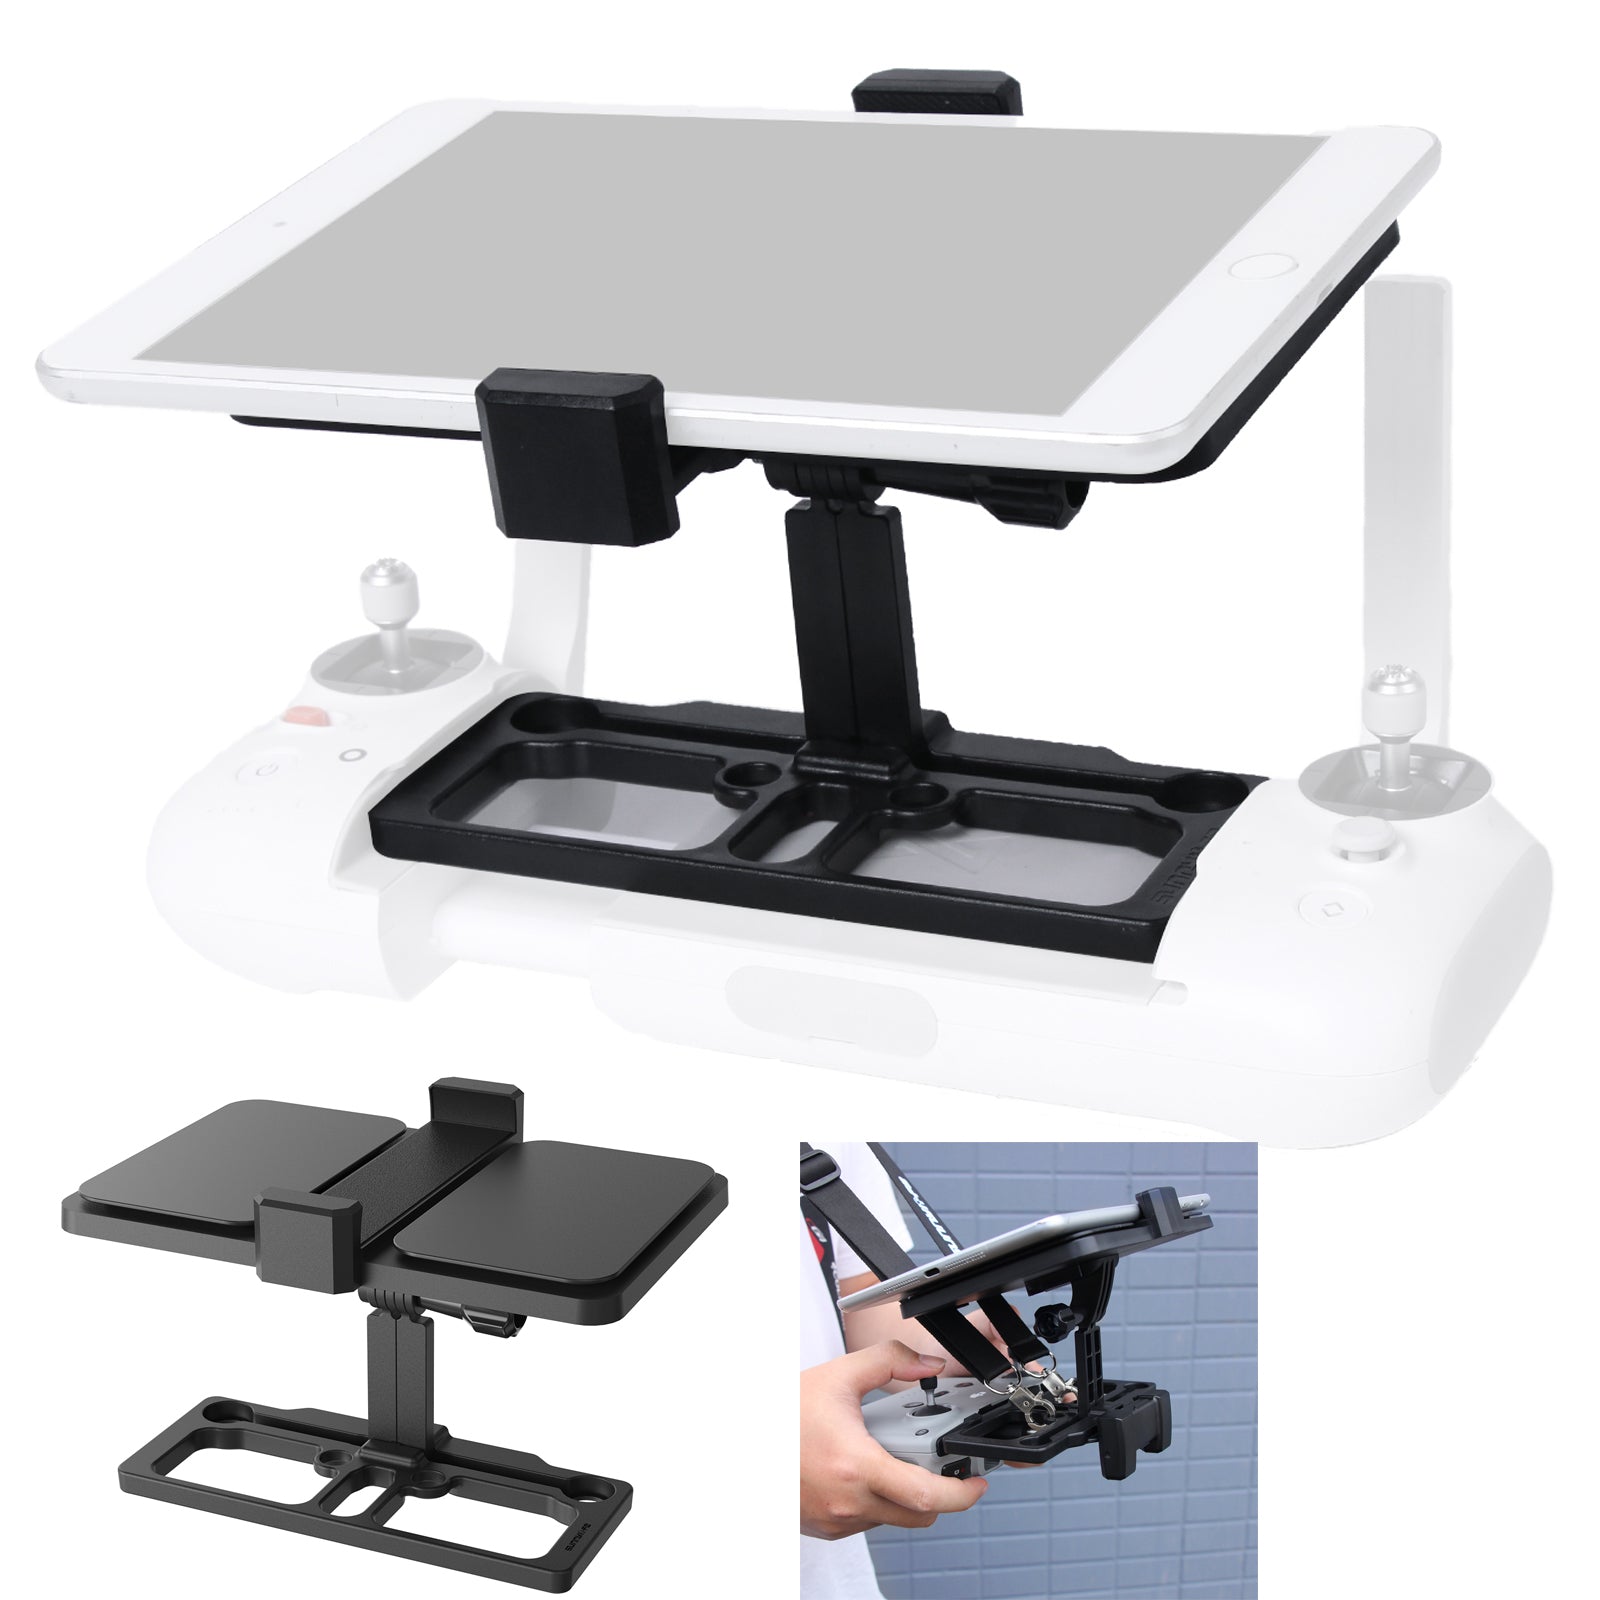 SUNNYLIFE ZJ066 Drone Accessories Portable Tablet Holder Remote Controller Extended Stand with Adjustable Strap for DJI Mavic 3/2/Mini SE/Air 2S/Spark/Fimi X8 Mini